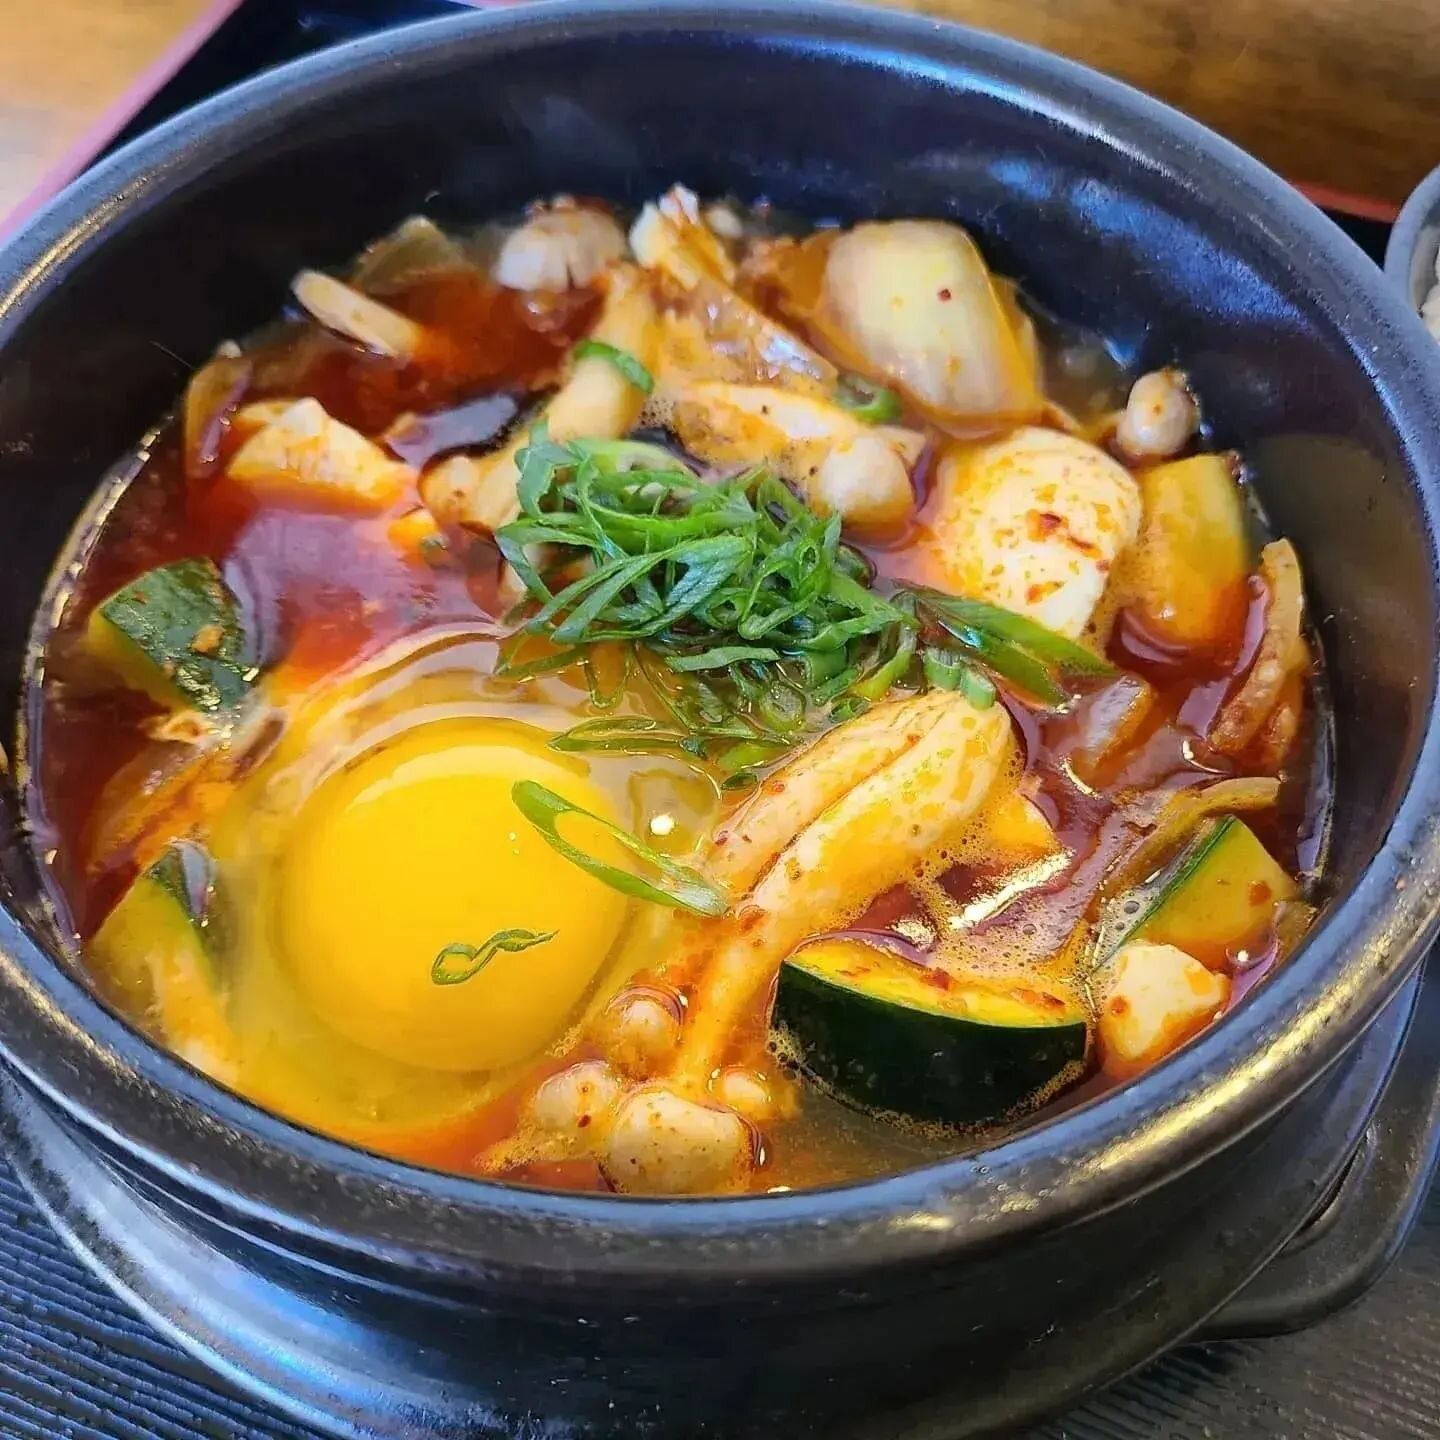 &hearts;️😍Weekend Special!!😍&hearts;️
When we see a bubbling claypot filled with Soondubu Jigae, we can't help but feel all warm and fuzzy inside. You take that first bite, and BAM, you're in love. Make your way to Kuji and fall in love with Soondu